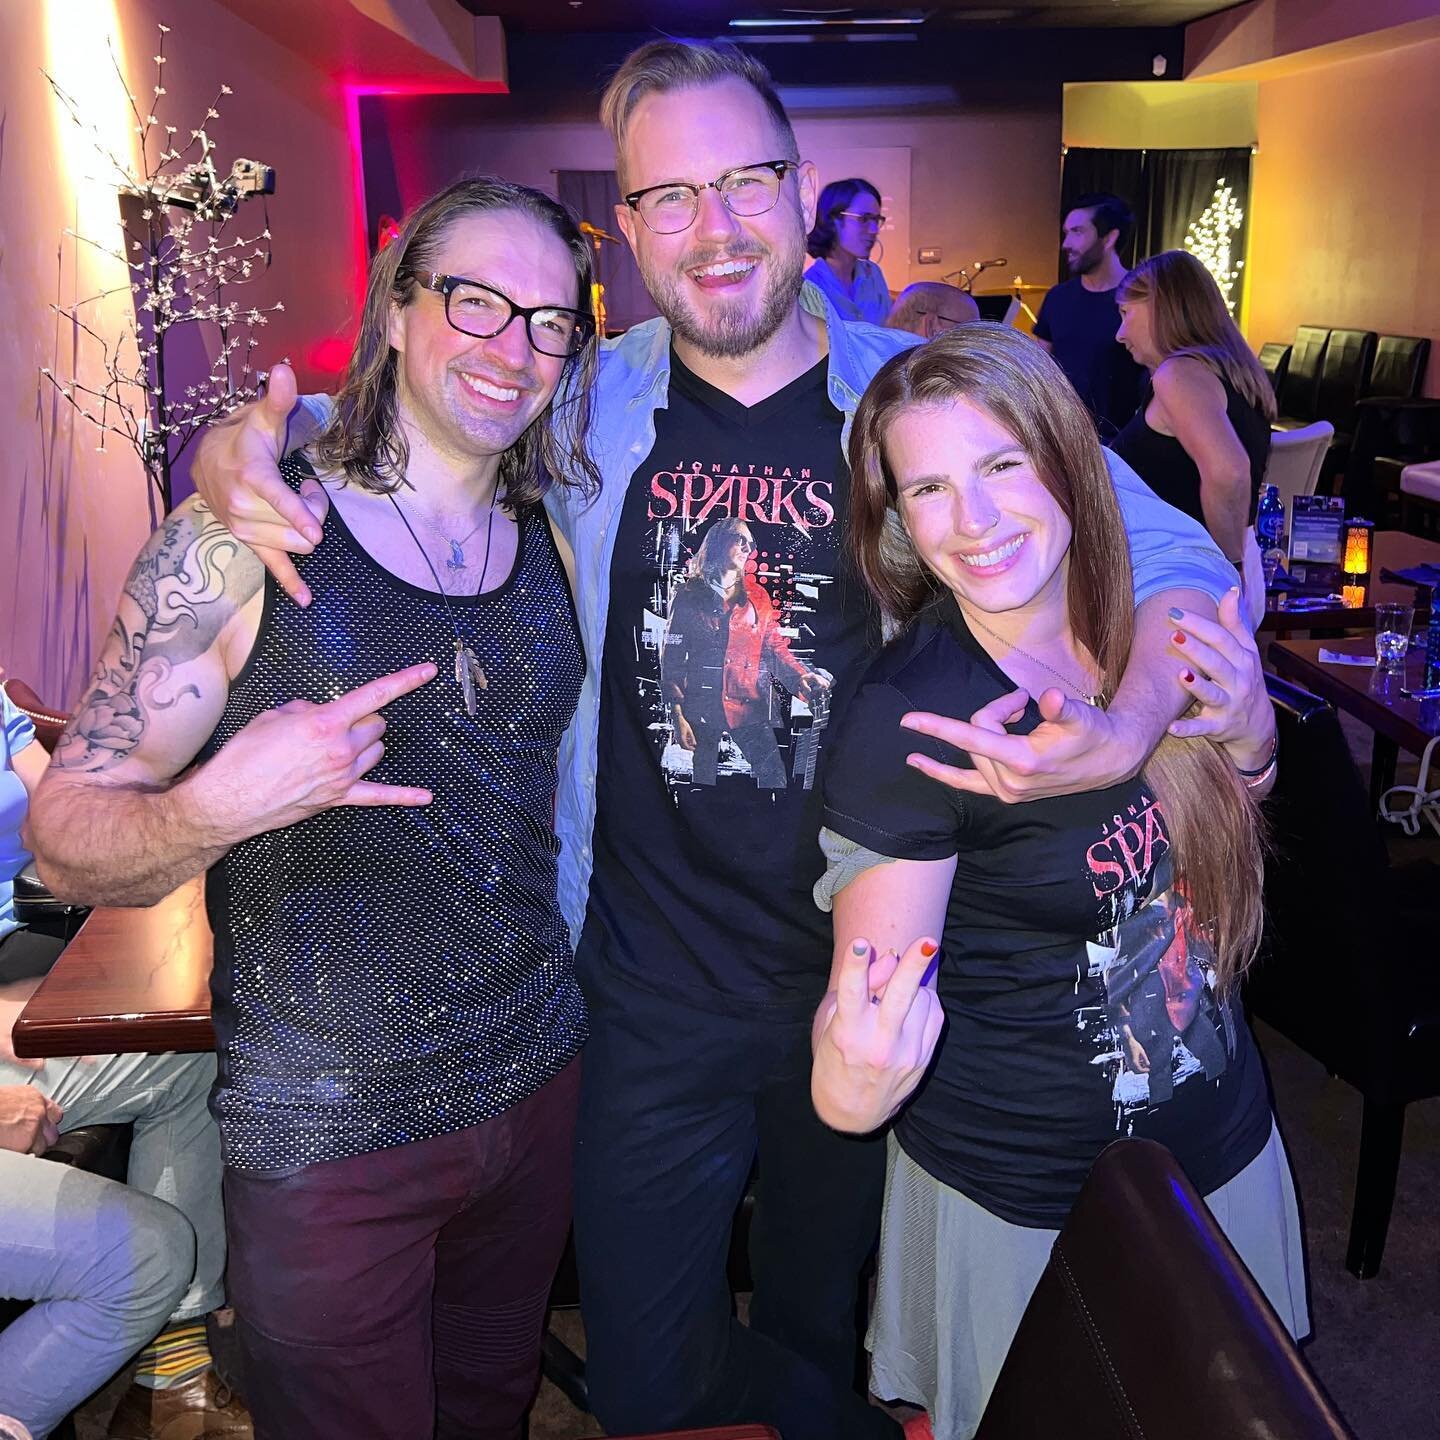 I am nothing without my fans! Thank you all for all your support, and for buying merch and proudly wearing my face! 😂🤘🏻

Speaking of merch, we&rsquo;ve got some awesome Jonathan Sparks t-shirts in women&rsquo;s and men&rsquo;s sizes available for 